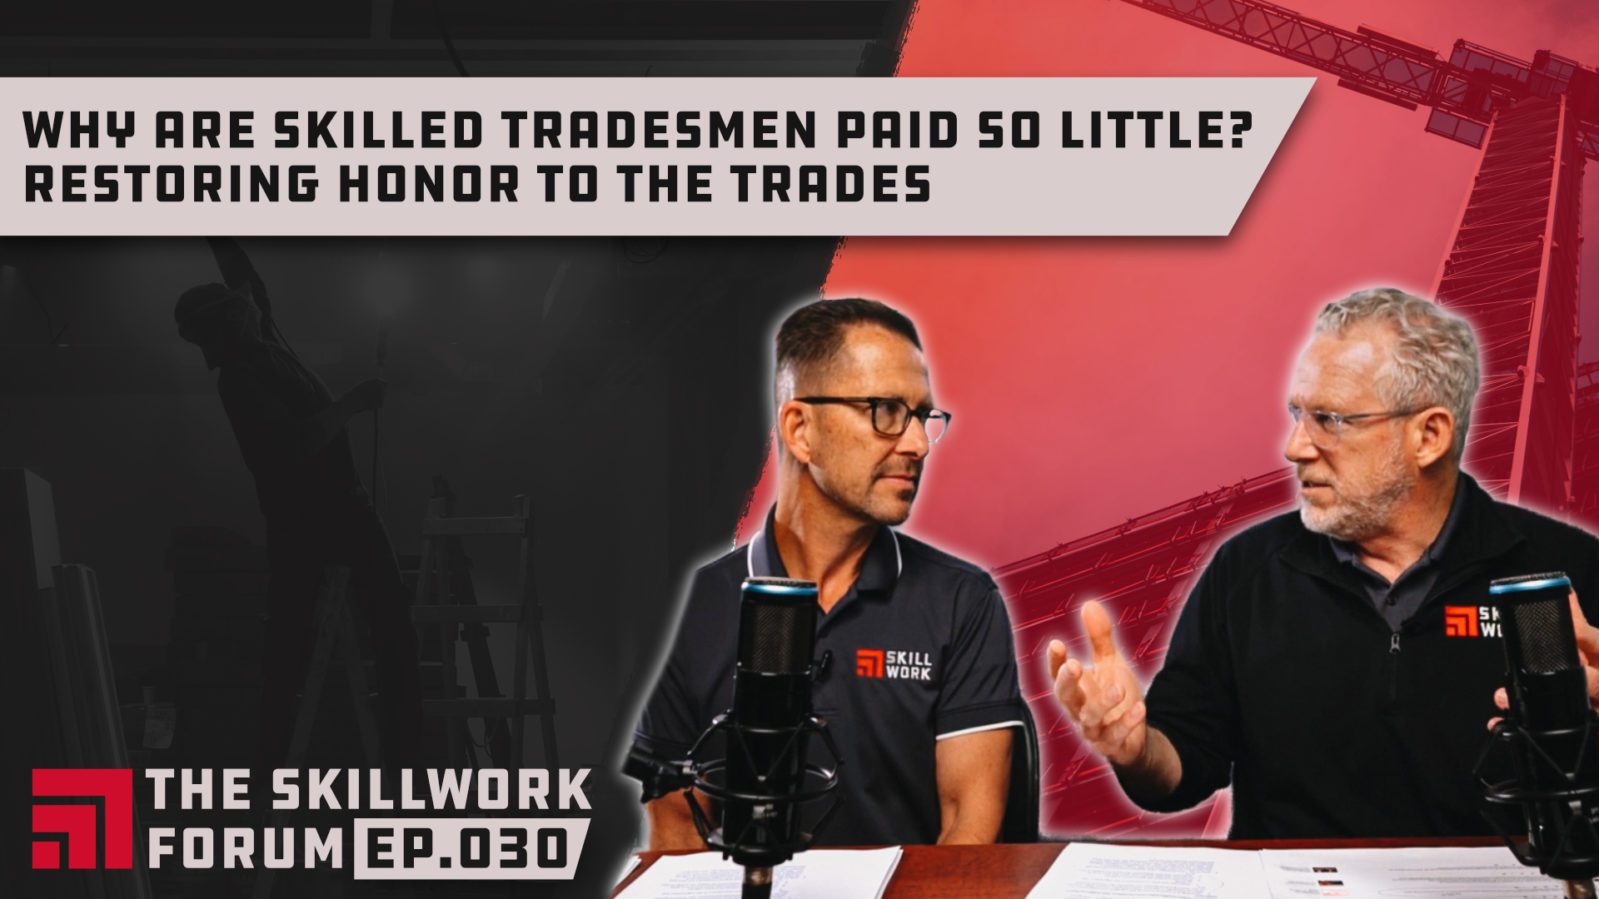 Skilled Labor Wages: Why Are Tradesmen Paid So Little?